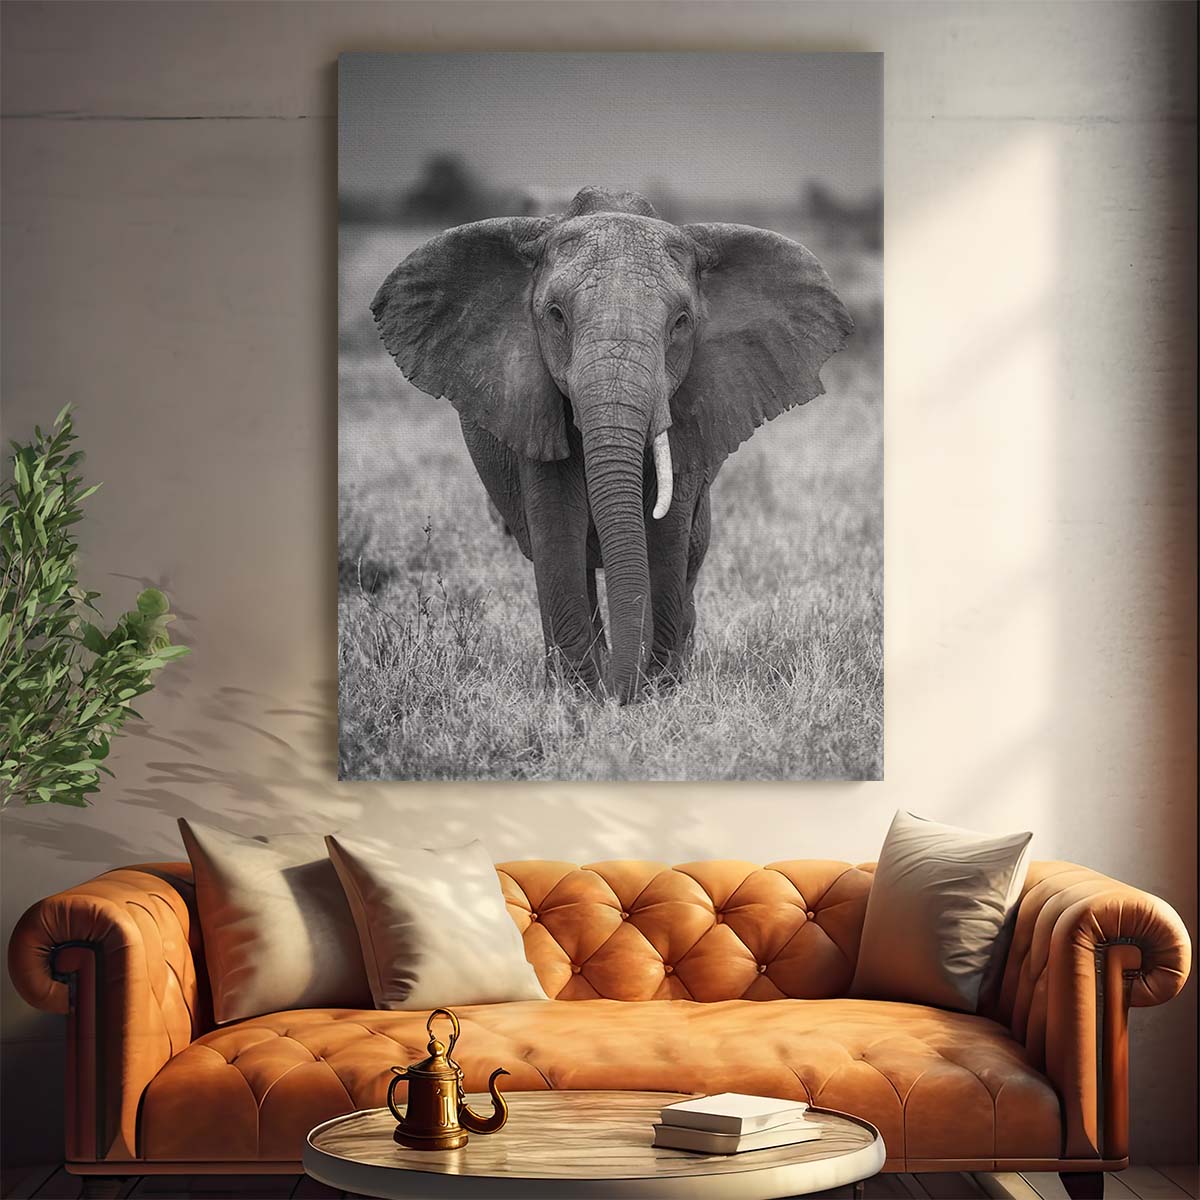 Majestic African Elephant Portrait Monochrome Wildlife Photography by Luxuriance Designs, made in USA